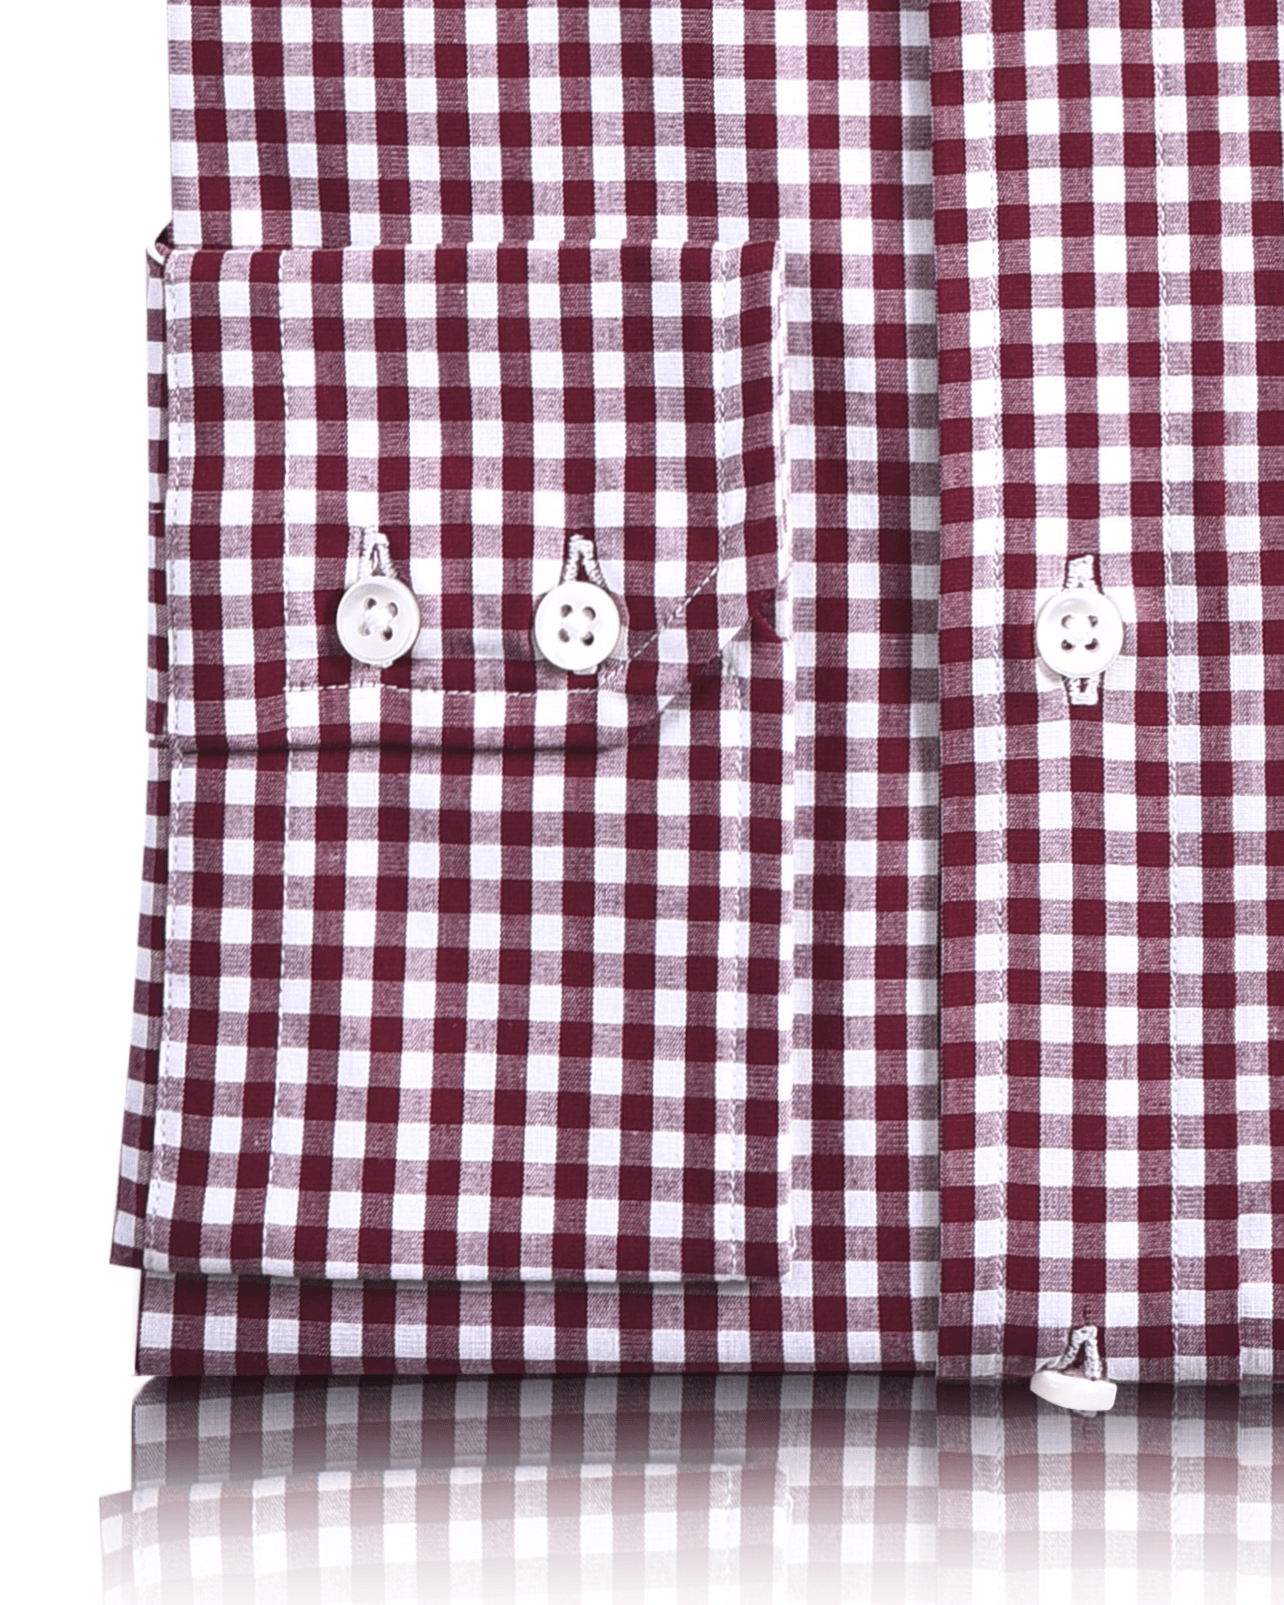 Close up view of custom check shirts for men by Luxire deep red gingham